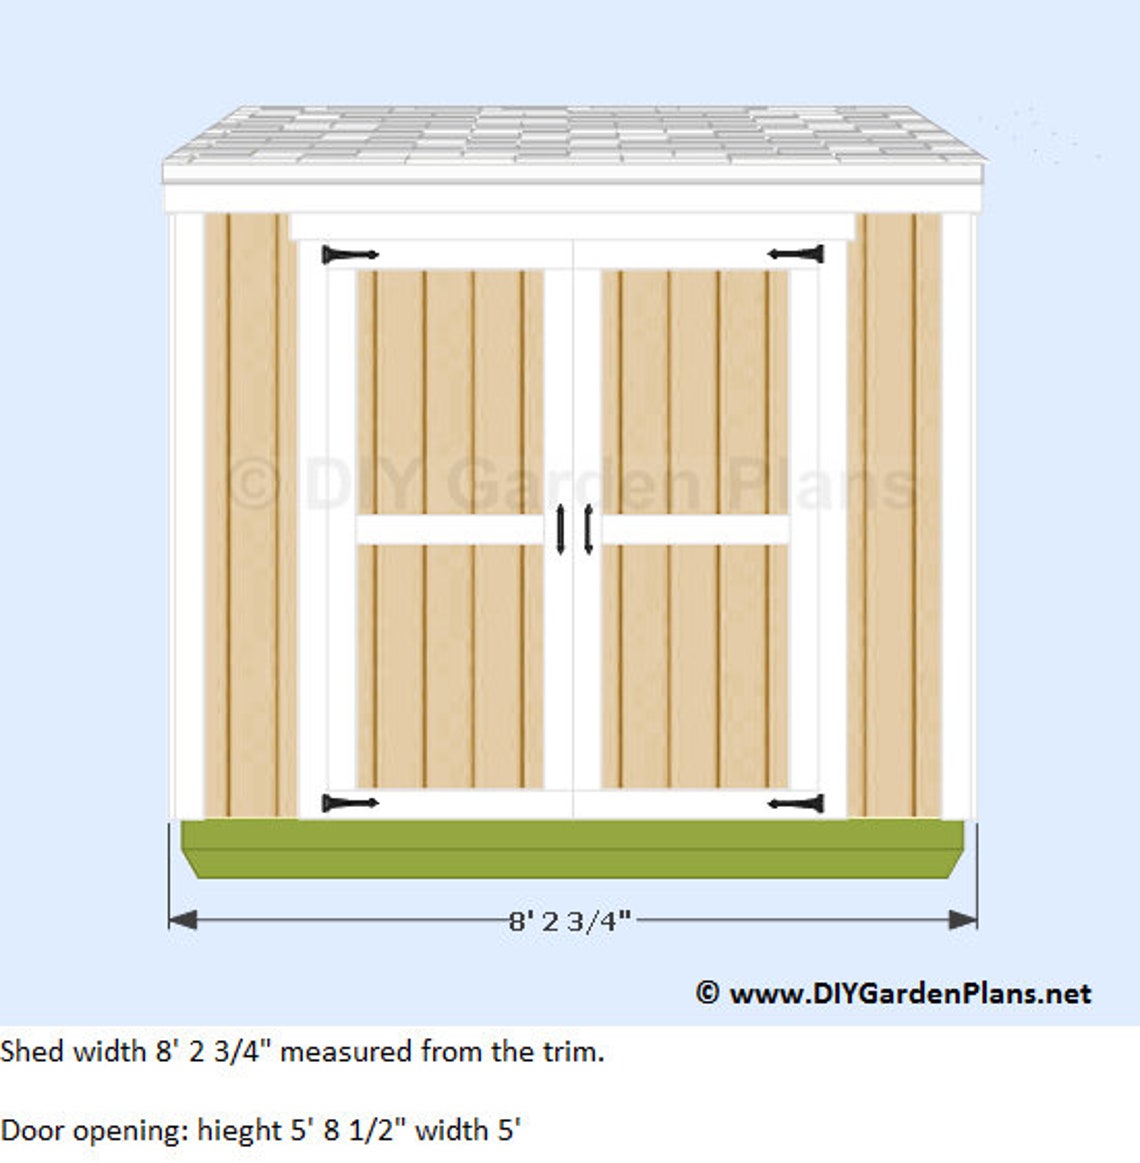 4x8 Lean to Shed Plans PDF Download - Etsy